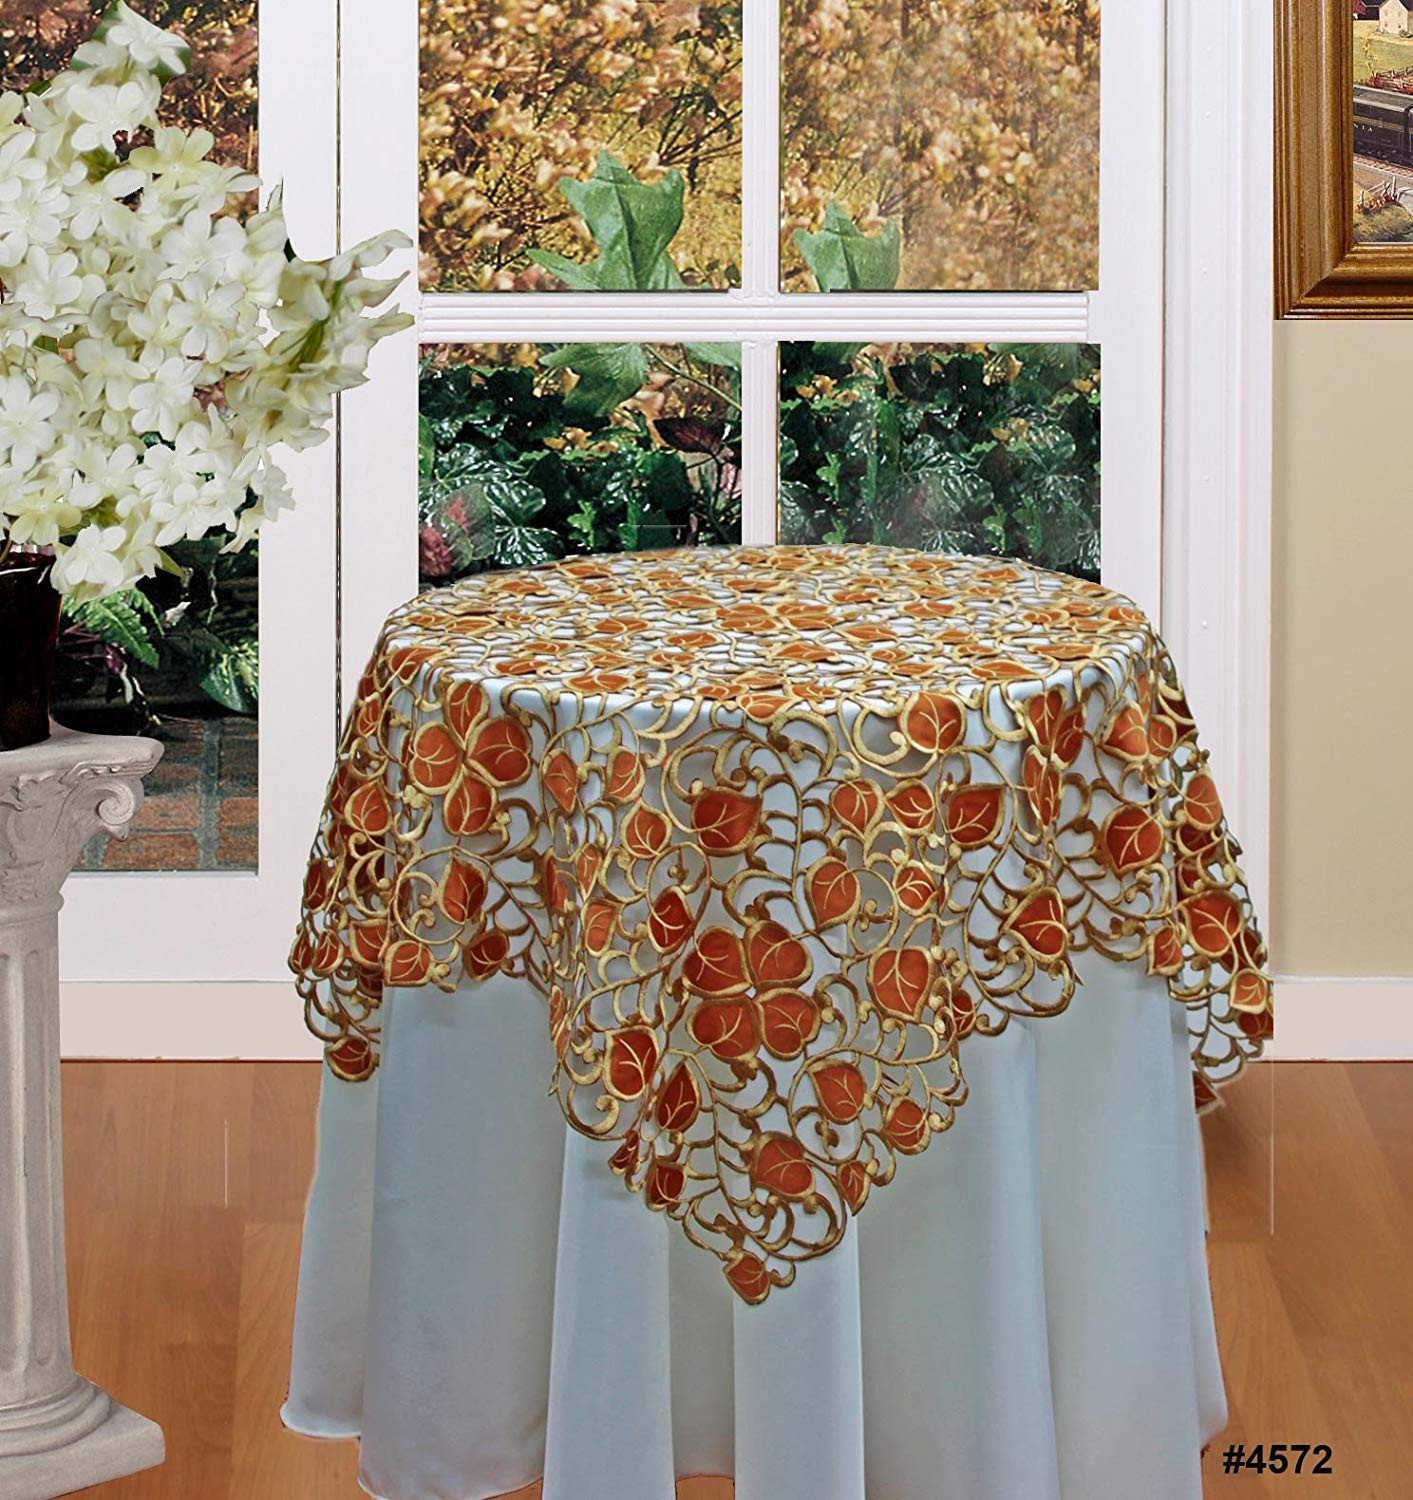 Thanksgiving Table Cloth
 Thanksgiving Fabric Tablecloths